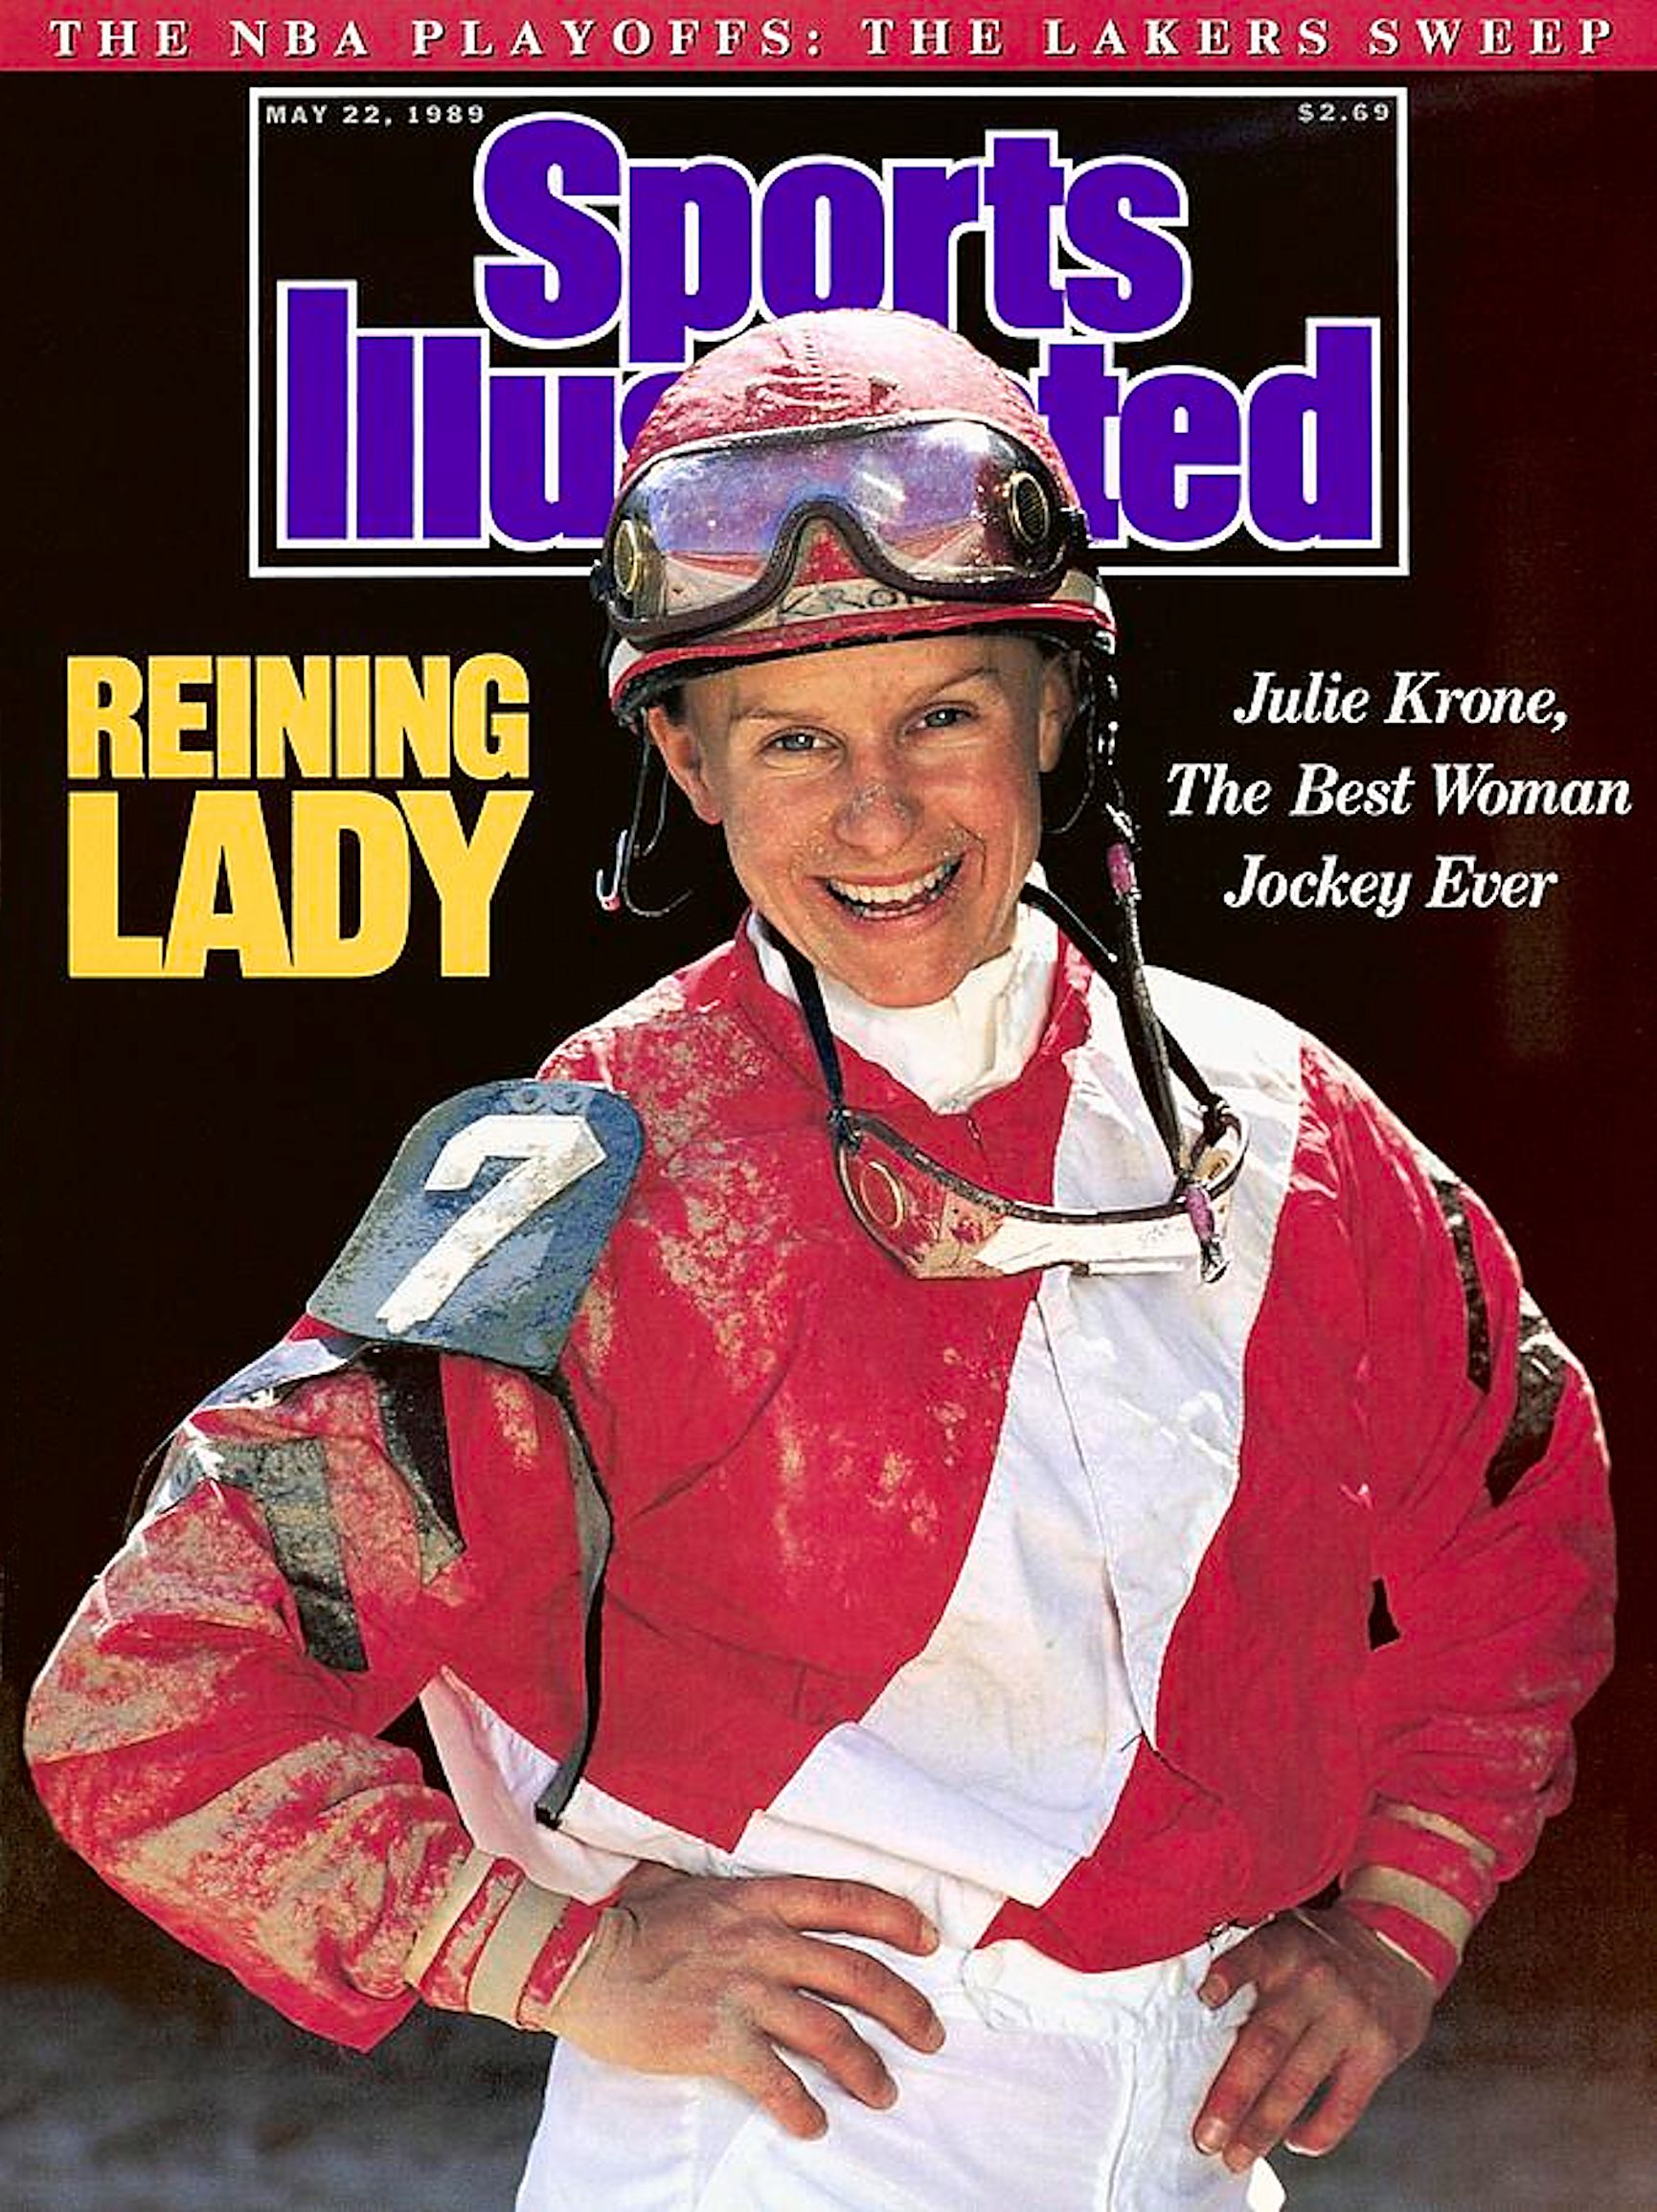 Julie Krone on the cover of "Sports Illustrated"